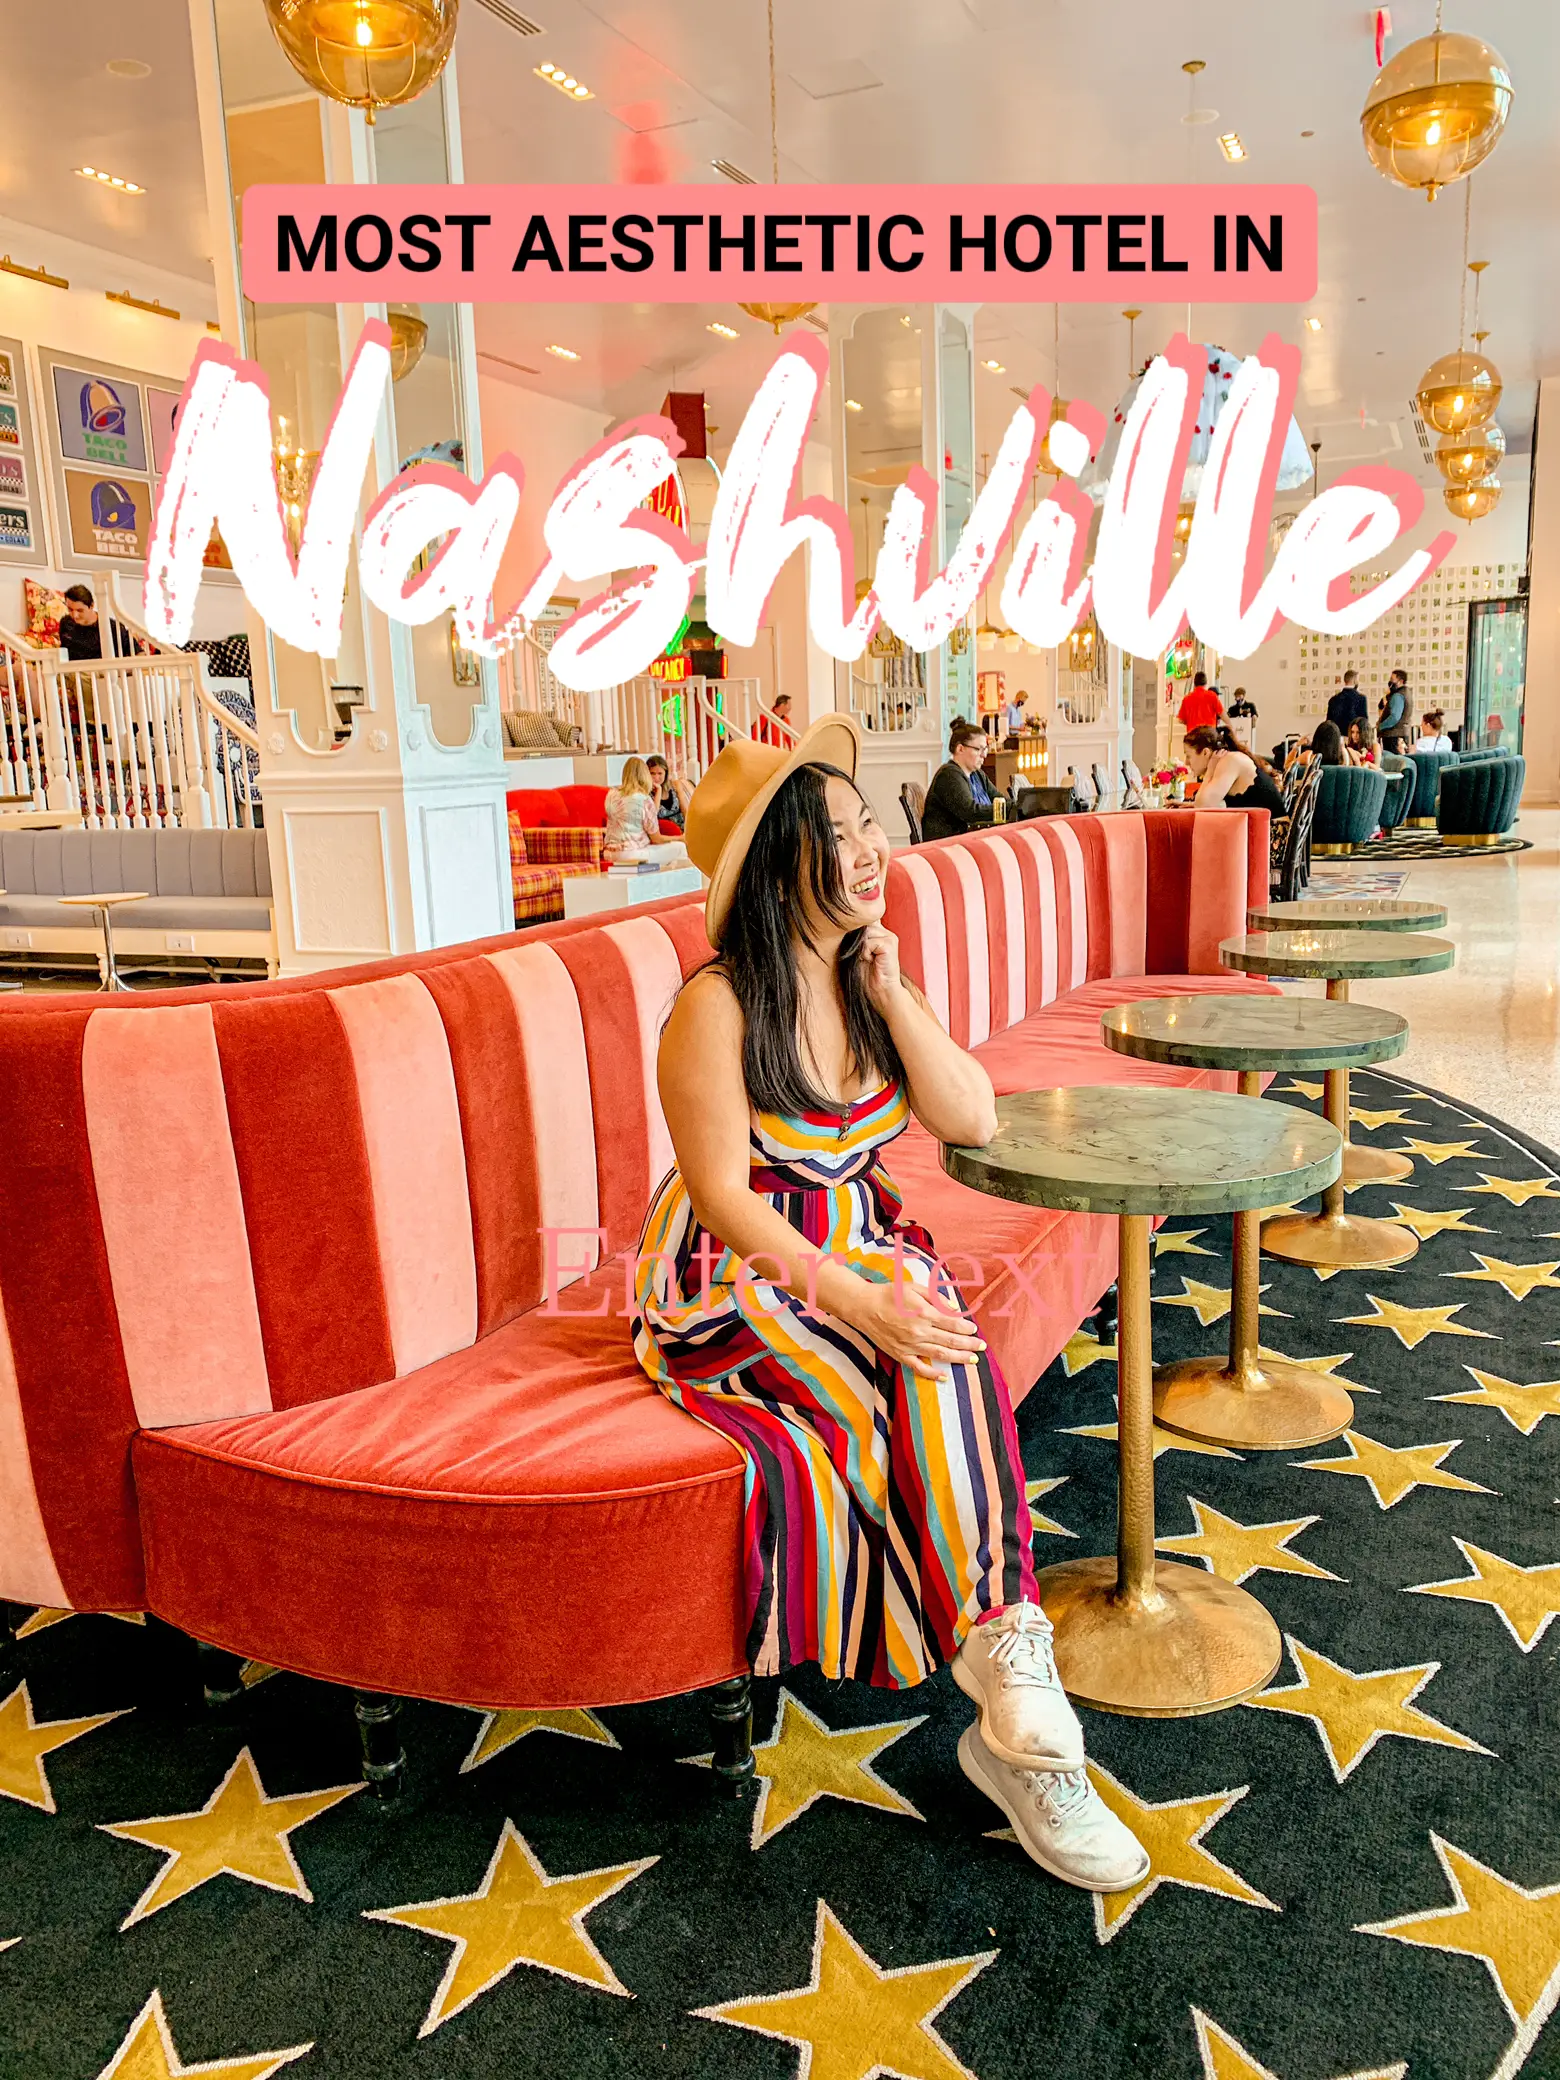 Most Aesthetic Hotel in Nashville's images